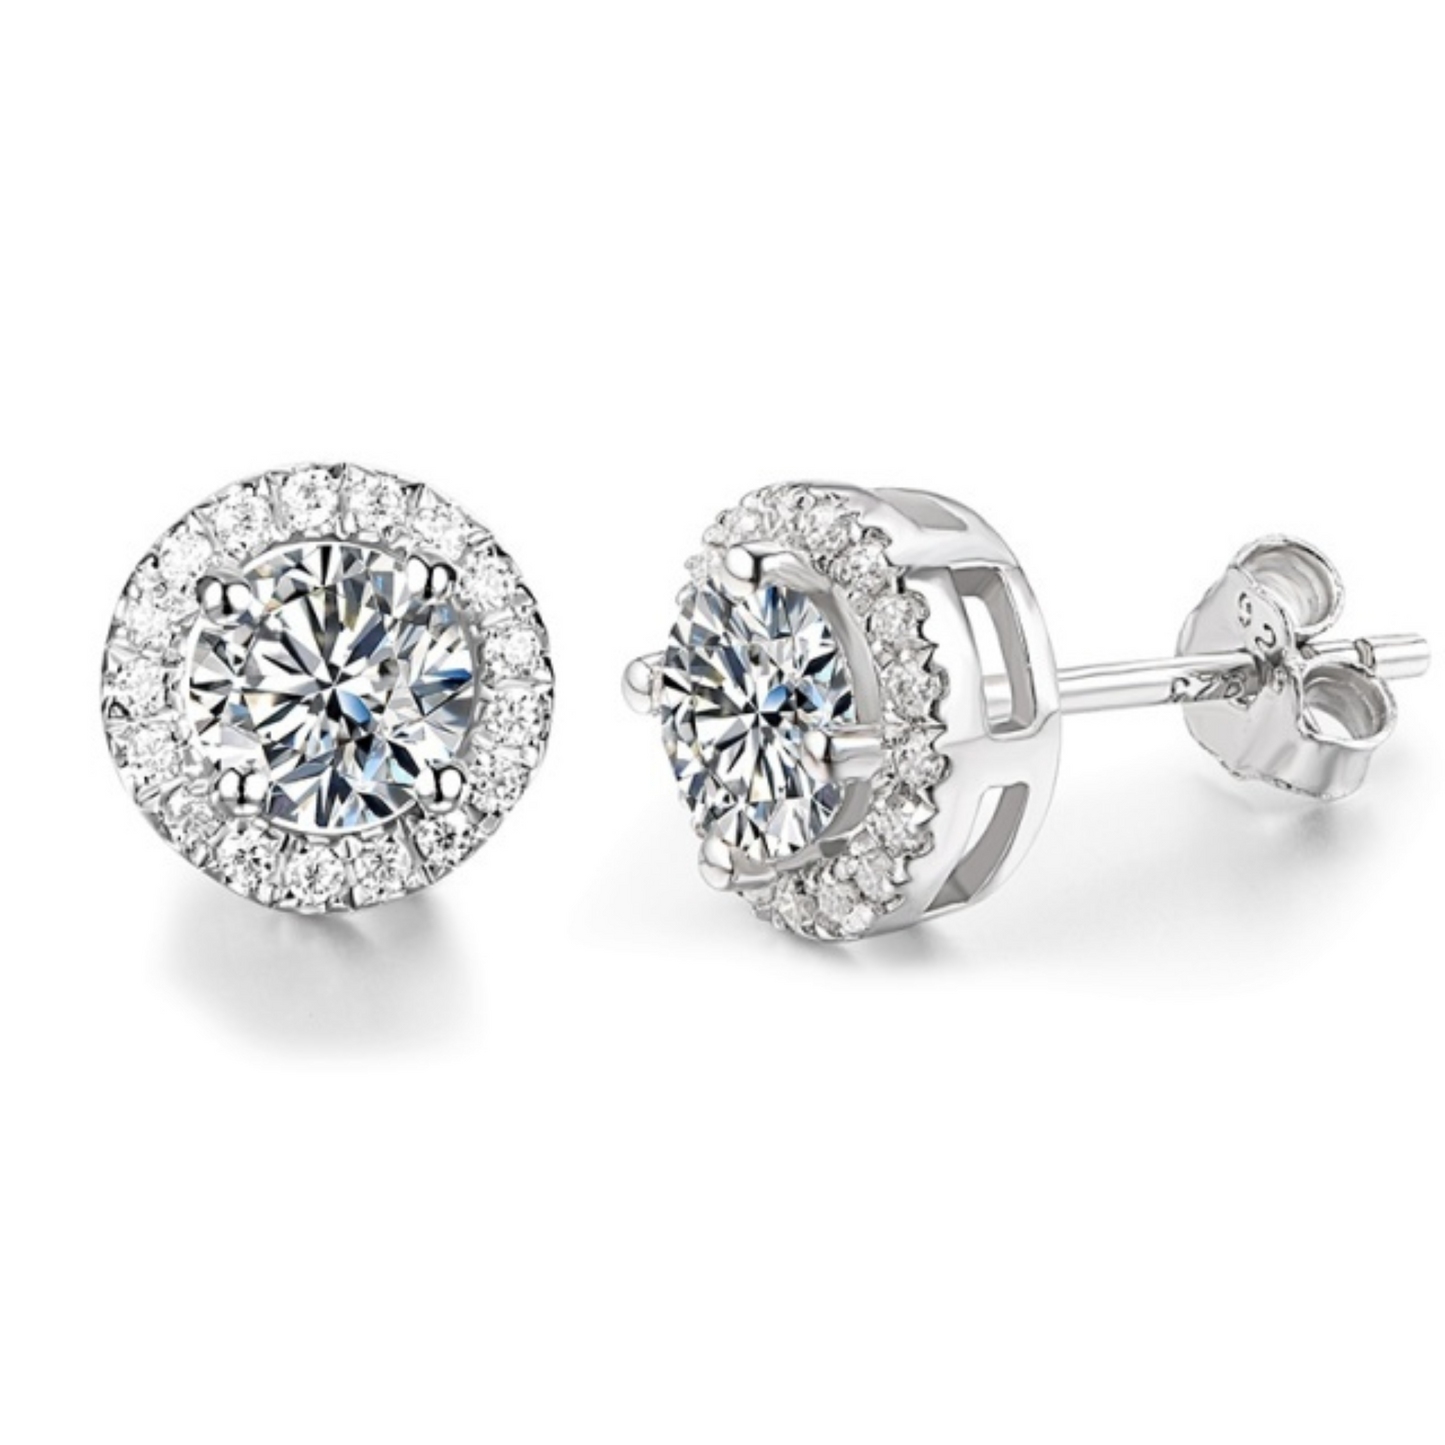 I Can See Your Halo - Moissanite Stud Earrings